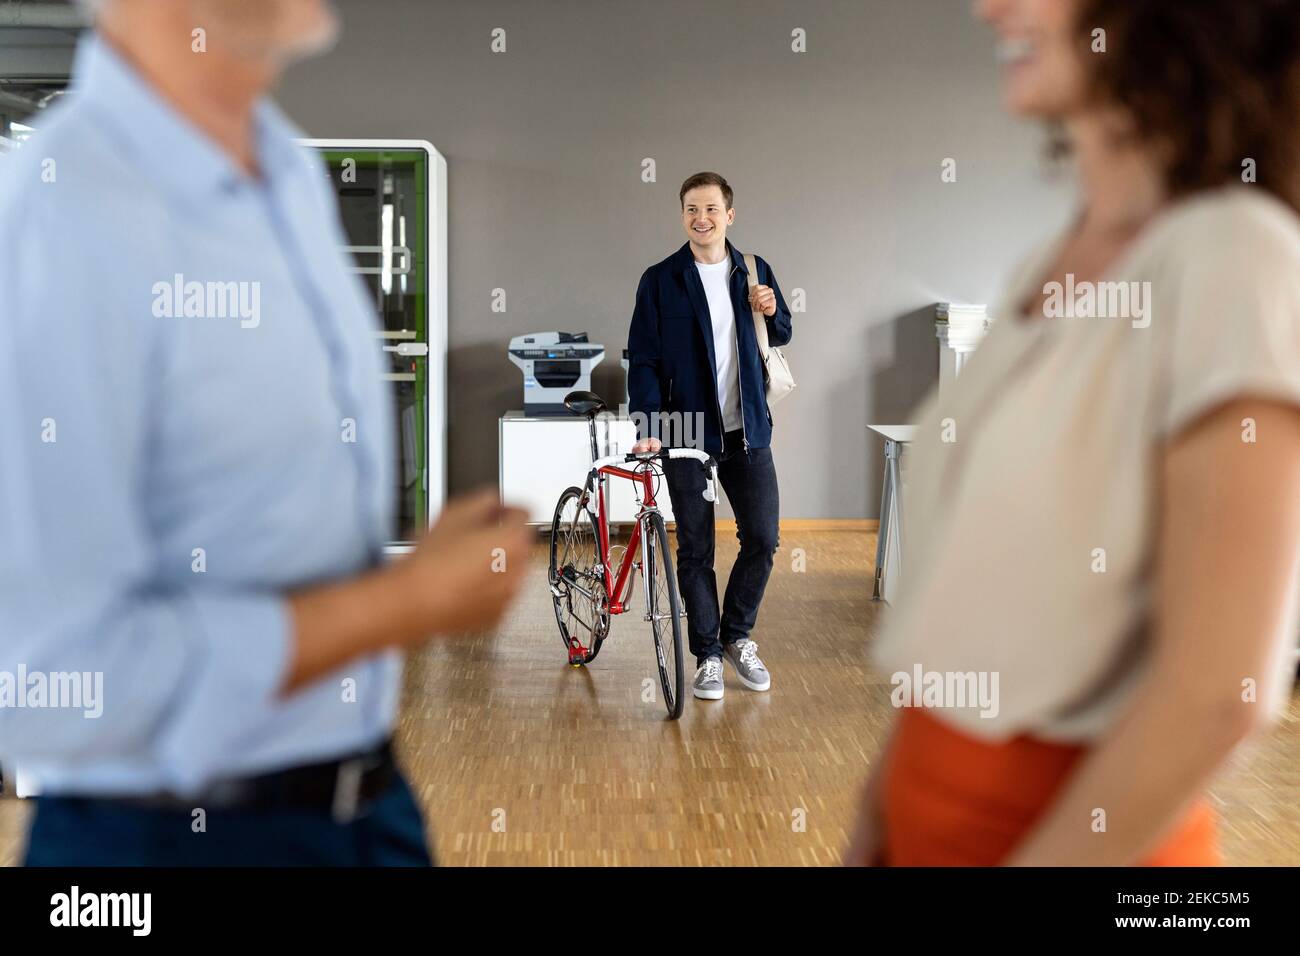 Business people standing with colleague in background holding bag while leaving after work from office Stock Photo